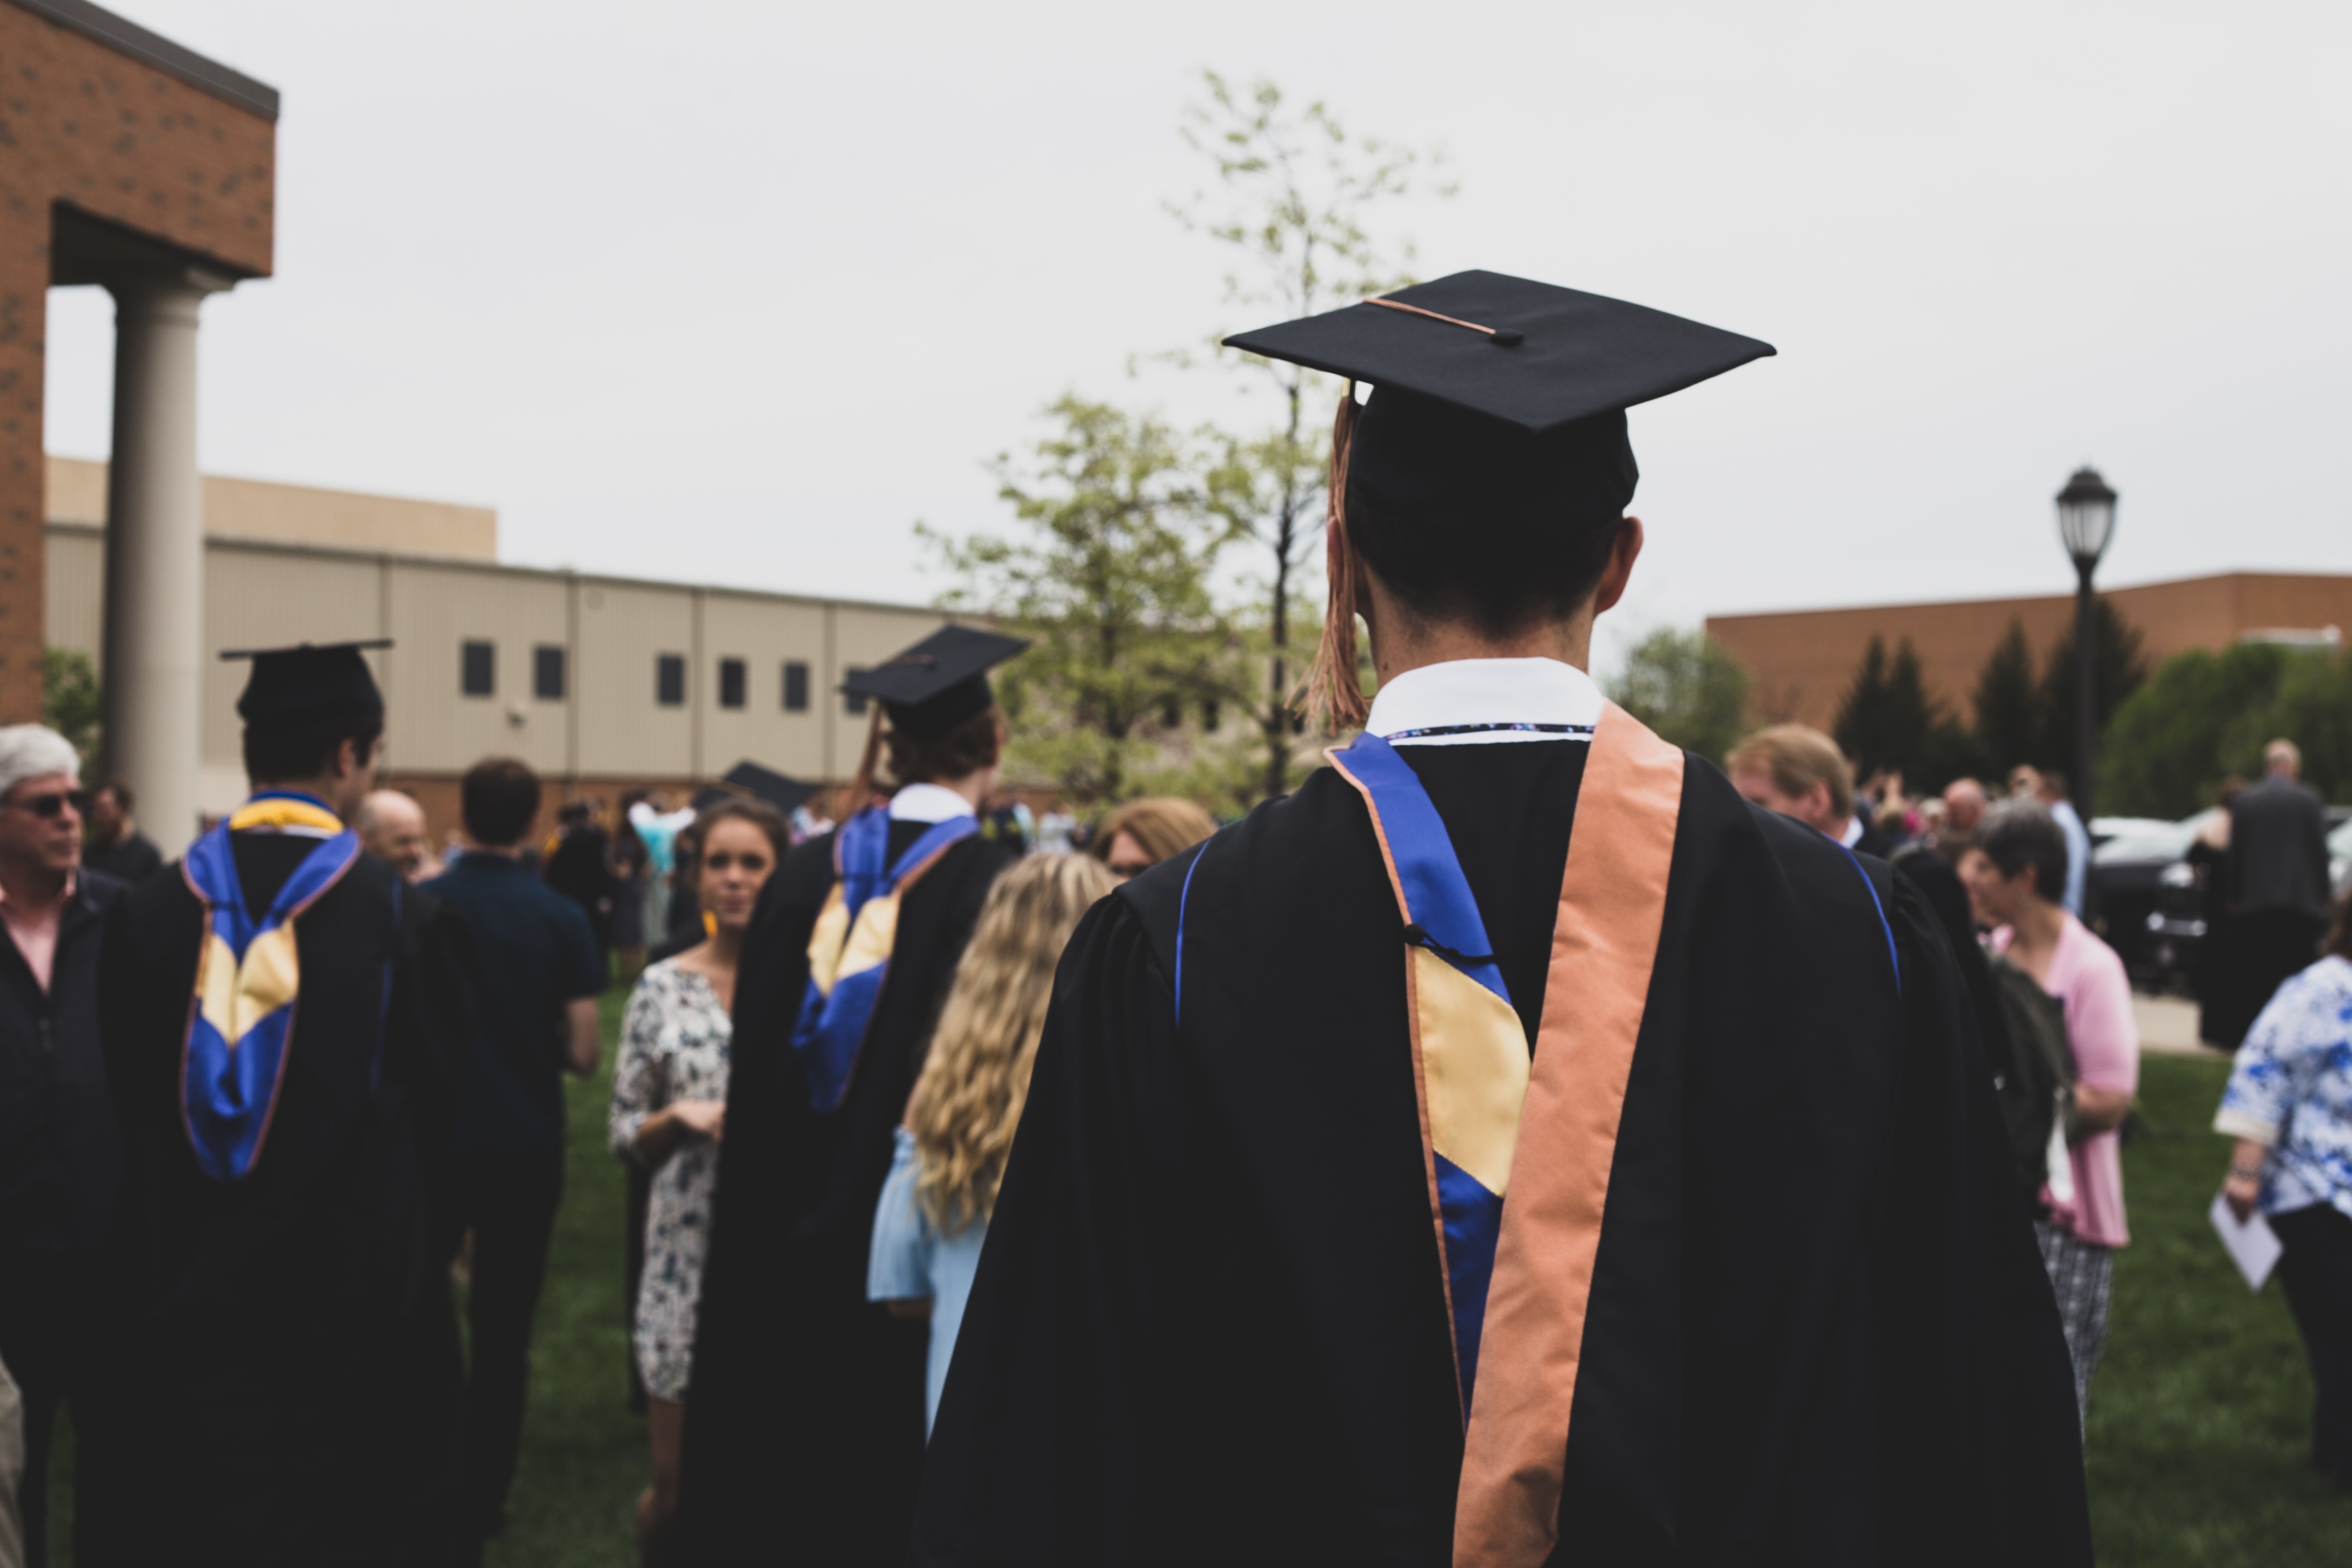 Ben's mom, Grace, was too busy to attend his graduation ceremony. | Source: Unsplash